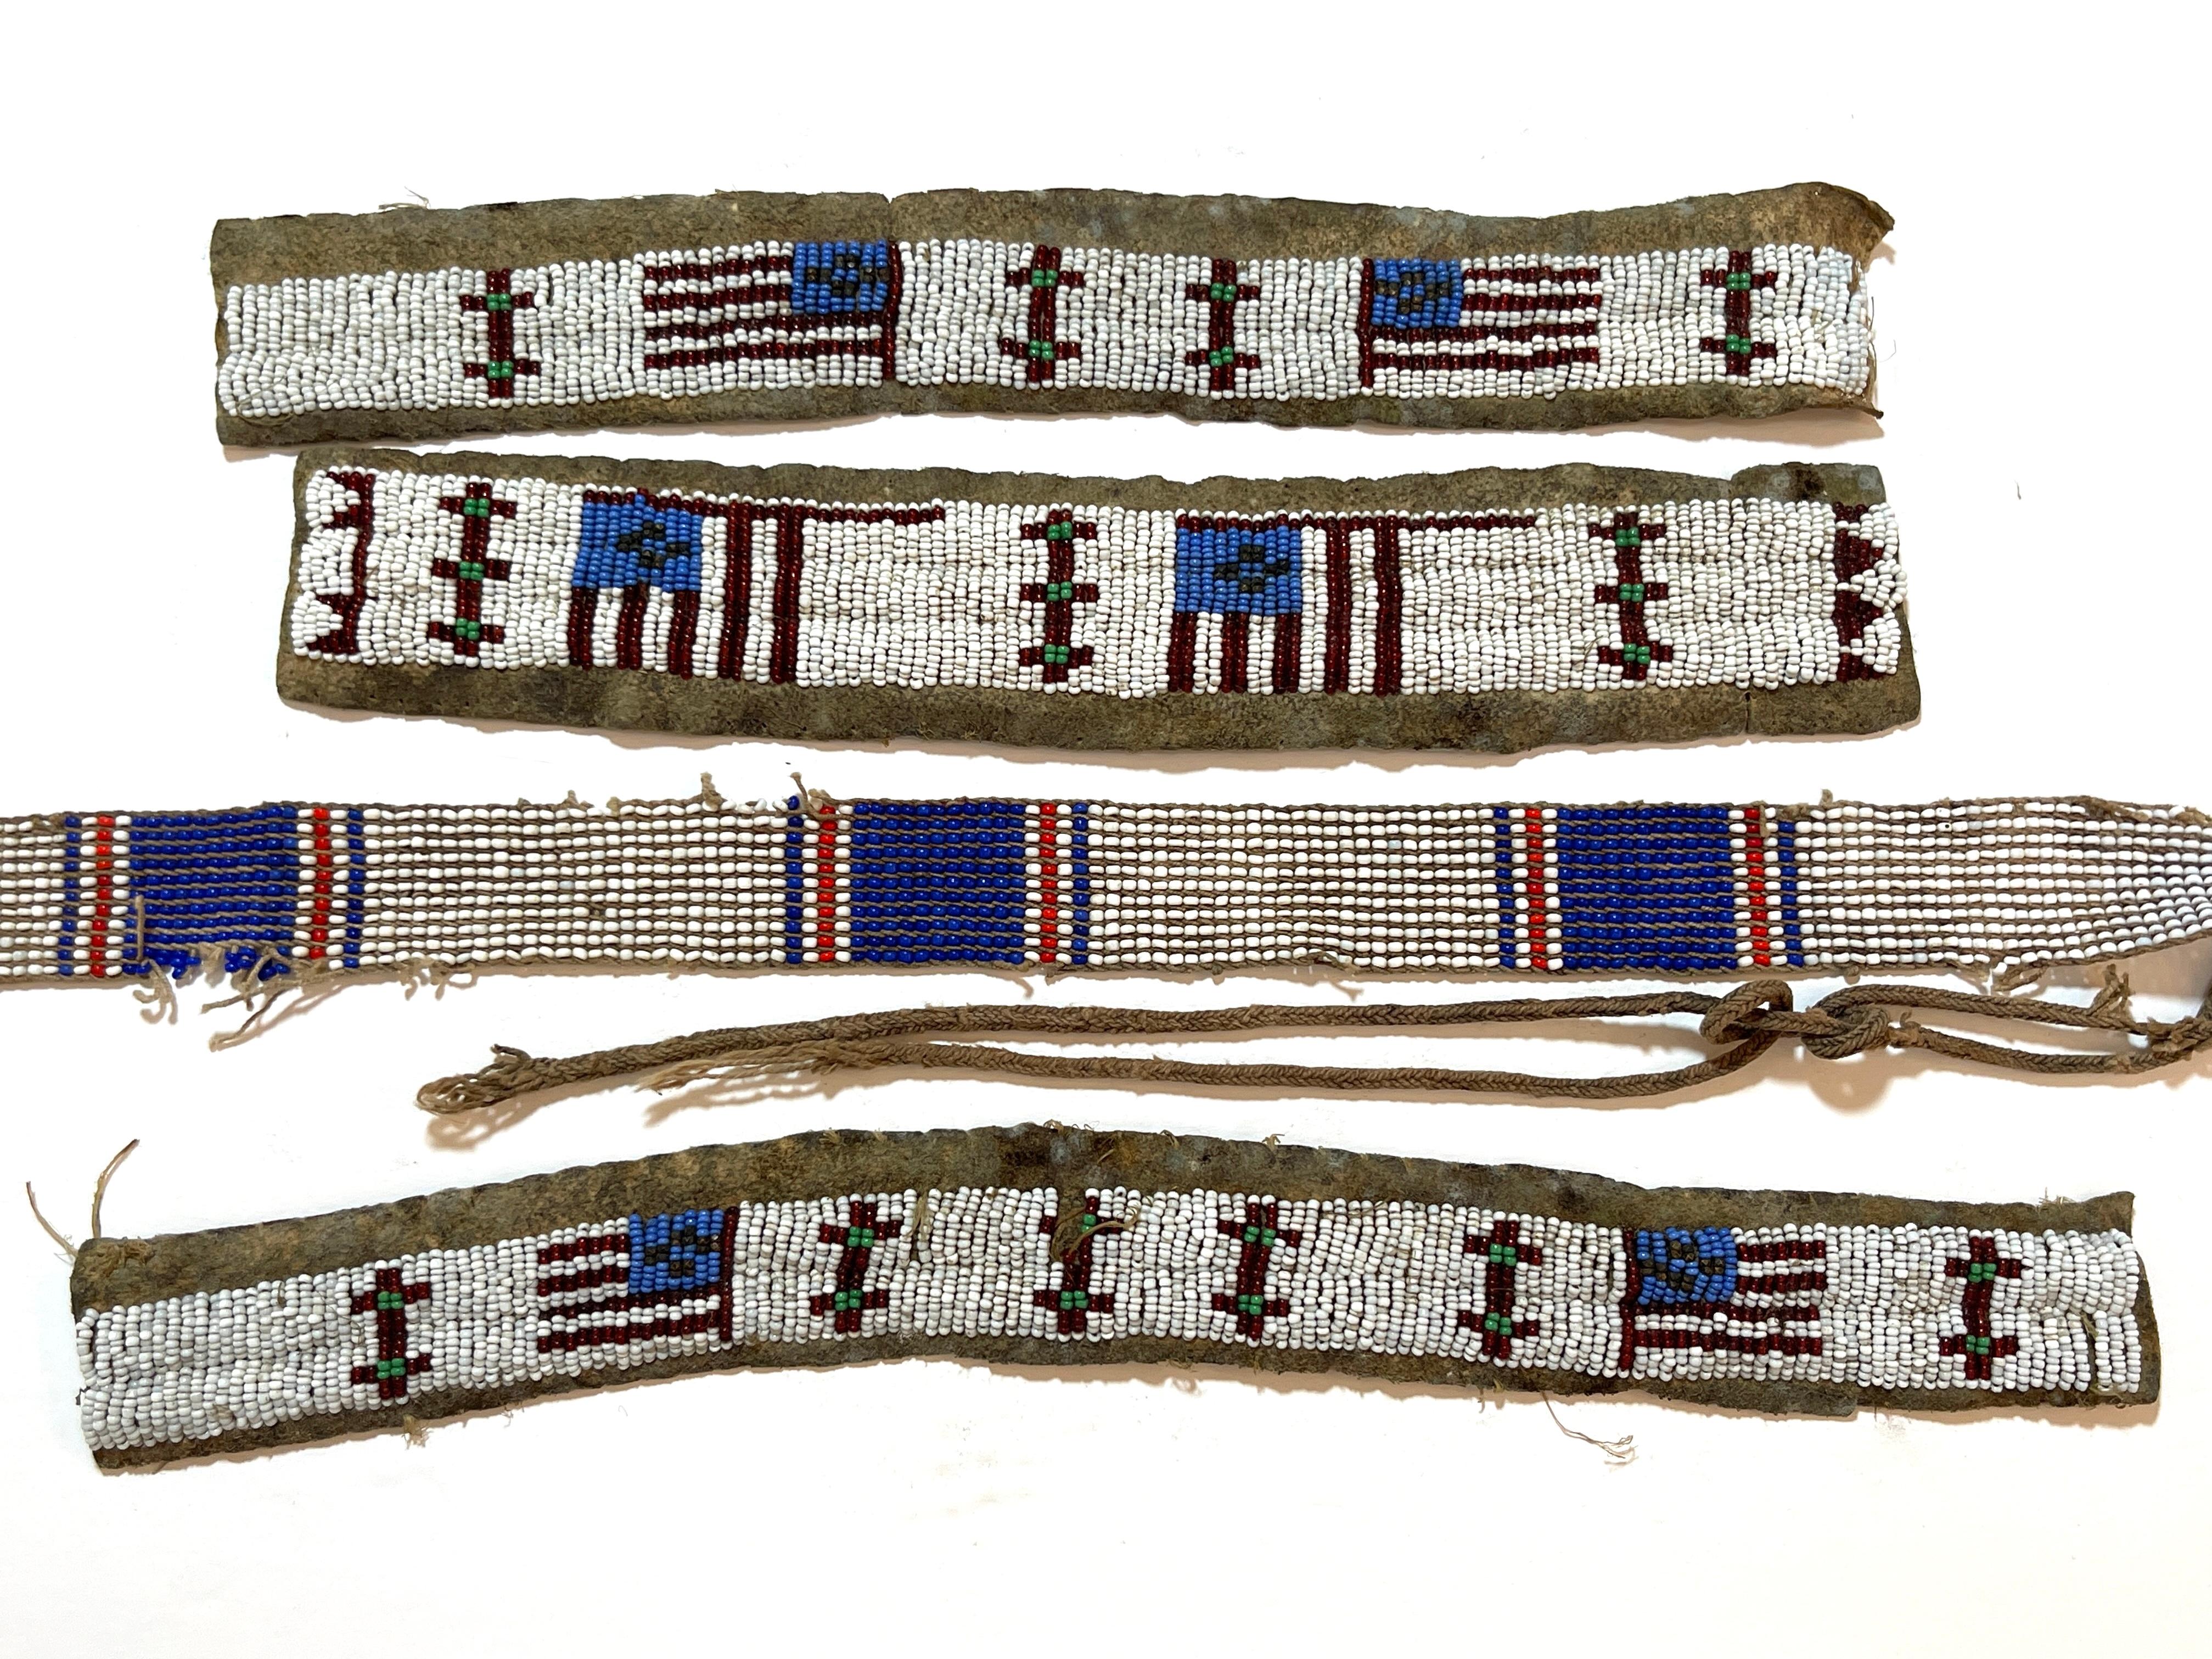 Set of 4 Plains Tribe American Flag Motif Ceremonial Beadwork Strips 
USA, circa 1900s
A rare collection of four Plains Tribe American Flag motif ceremonial beadwork strips dating back to the 1900s. Each piece is a stunning example of Native